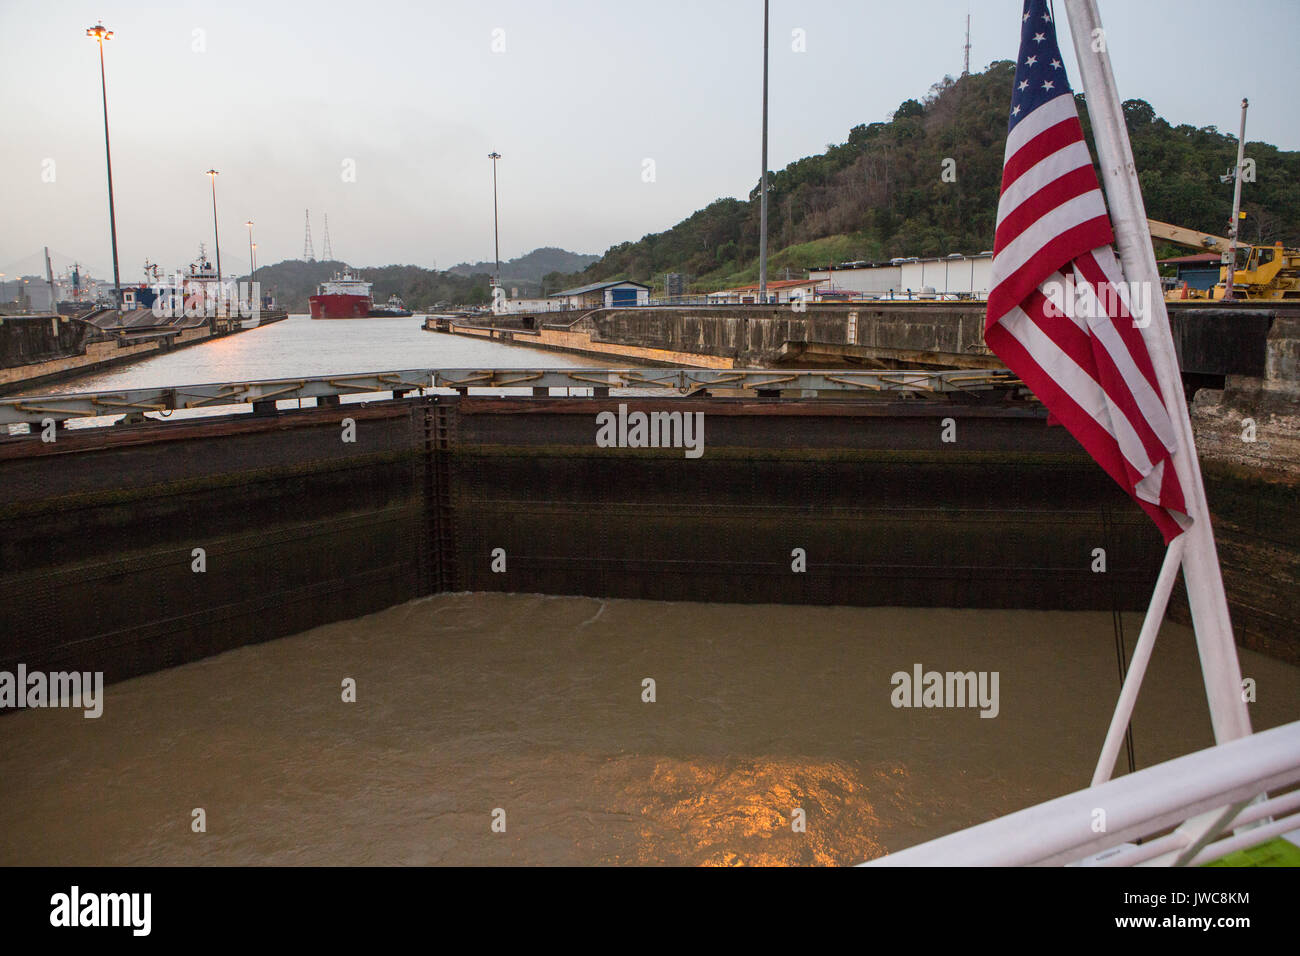 A view from an expedition cruise ship inside Pedro Miguel Locks of the Panama Canal. Stock Photo